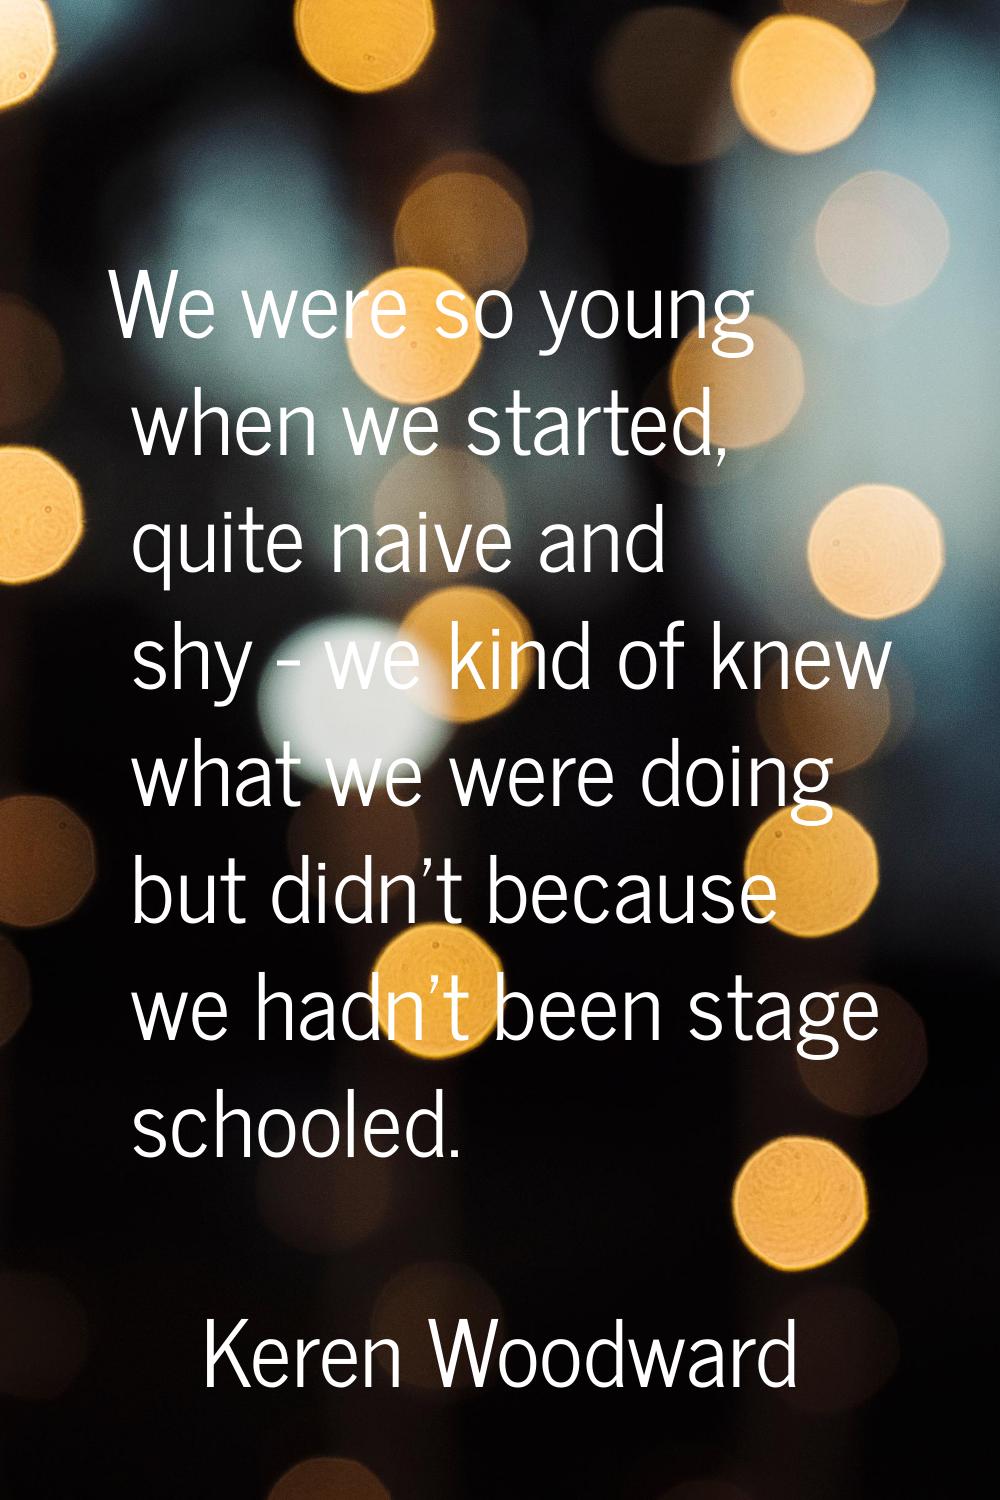 We were so young when we started, quite naive and shy - we kind of knew what we were doing but didn